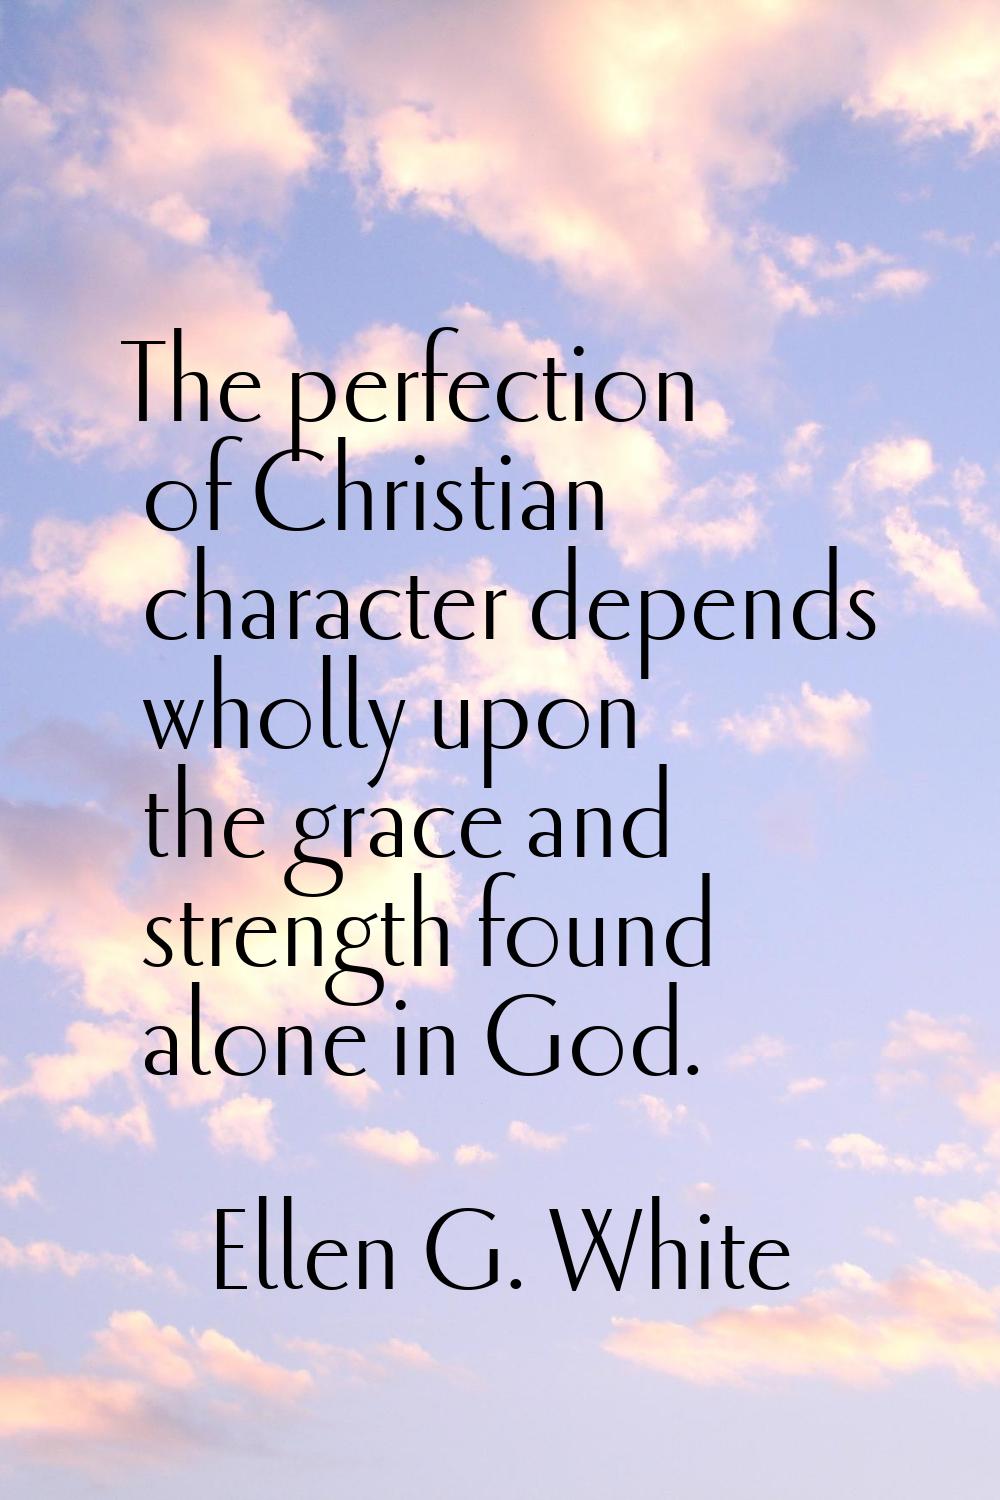 The perfection of Christian character depends wholly upon the grace and strength found alone in God